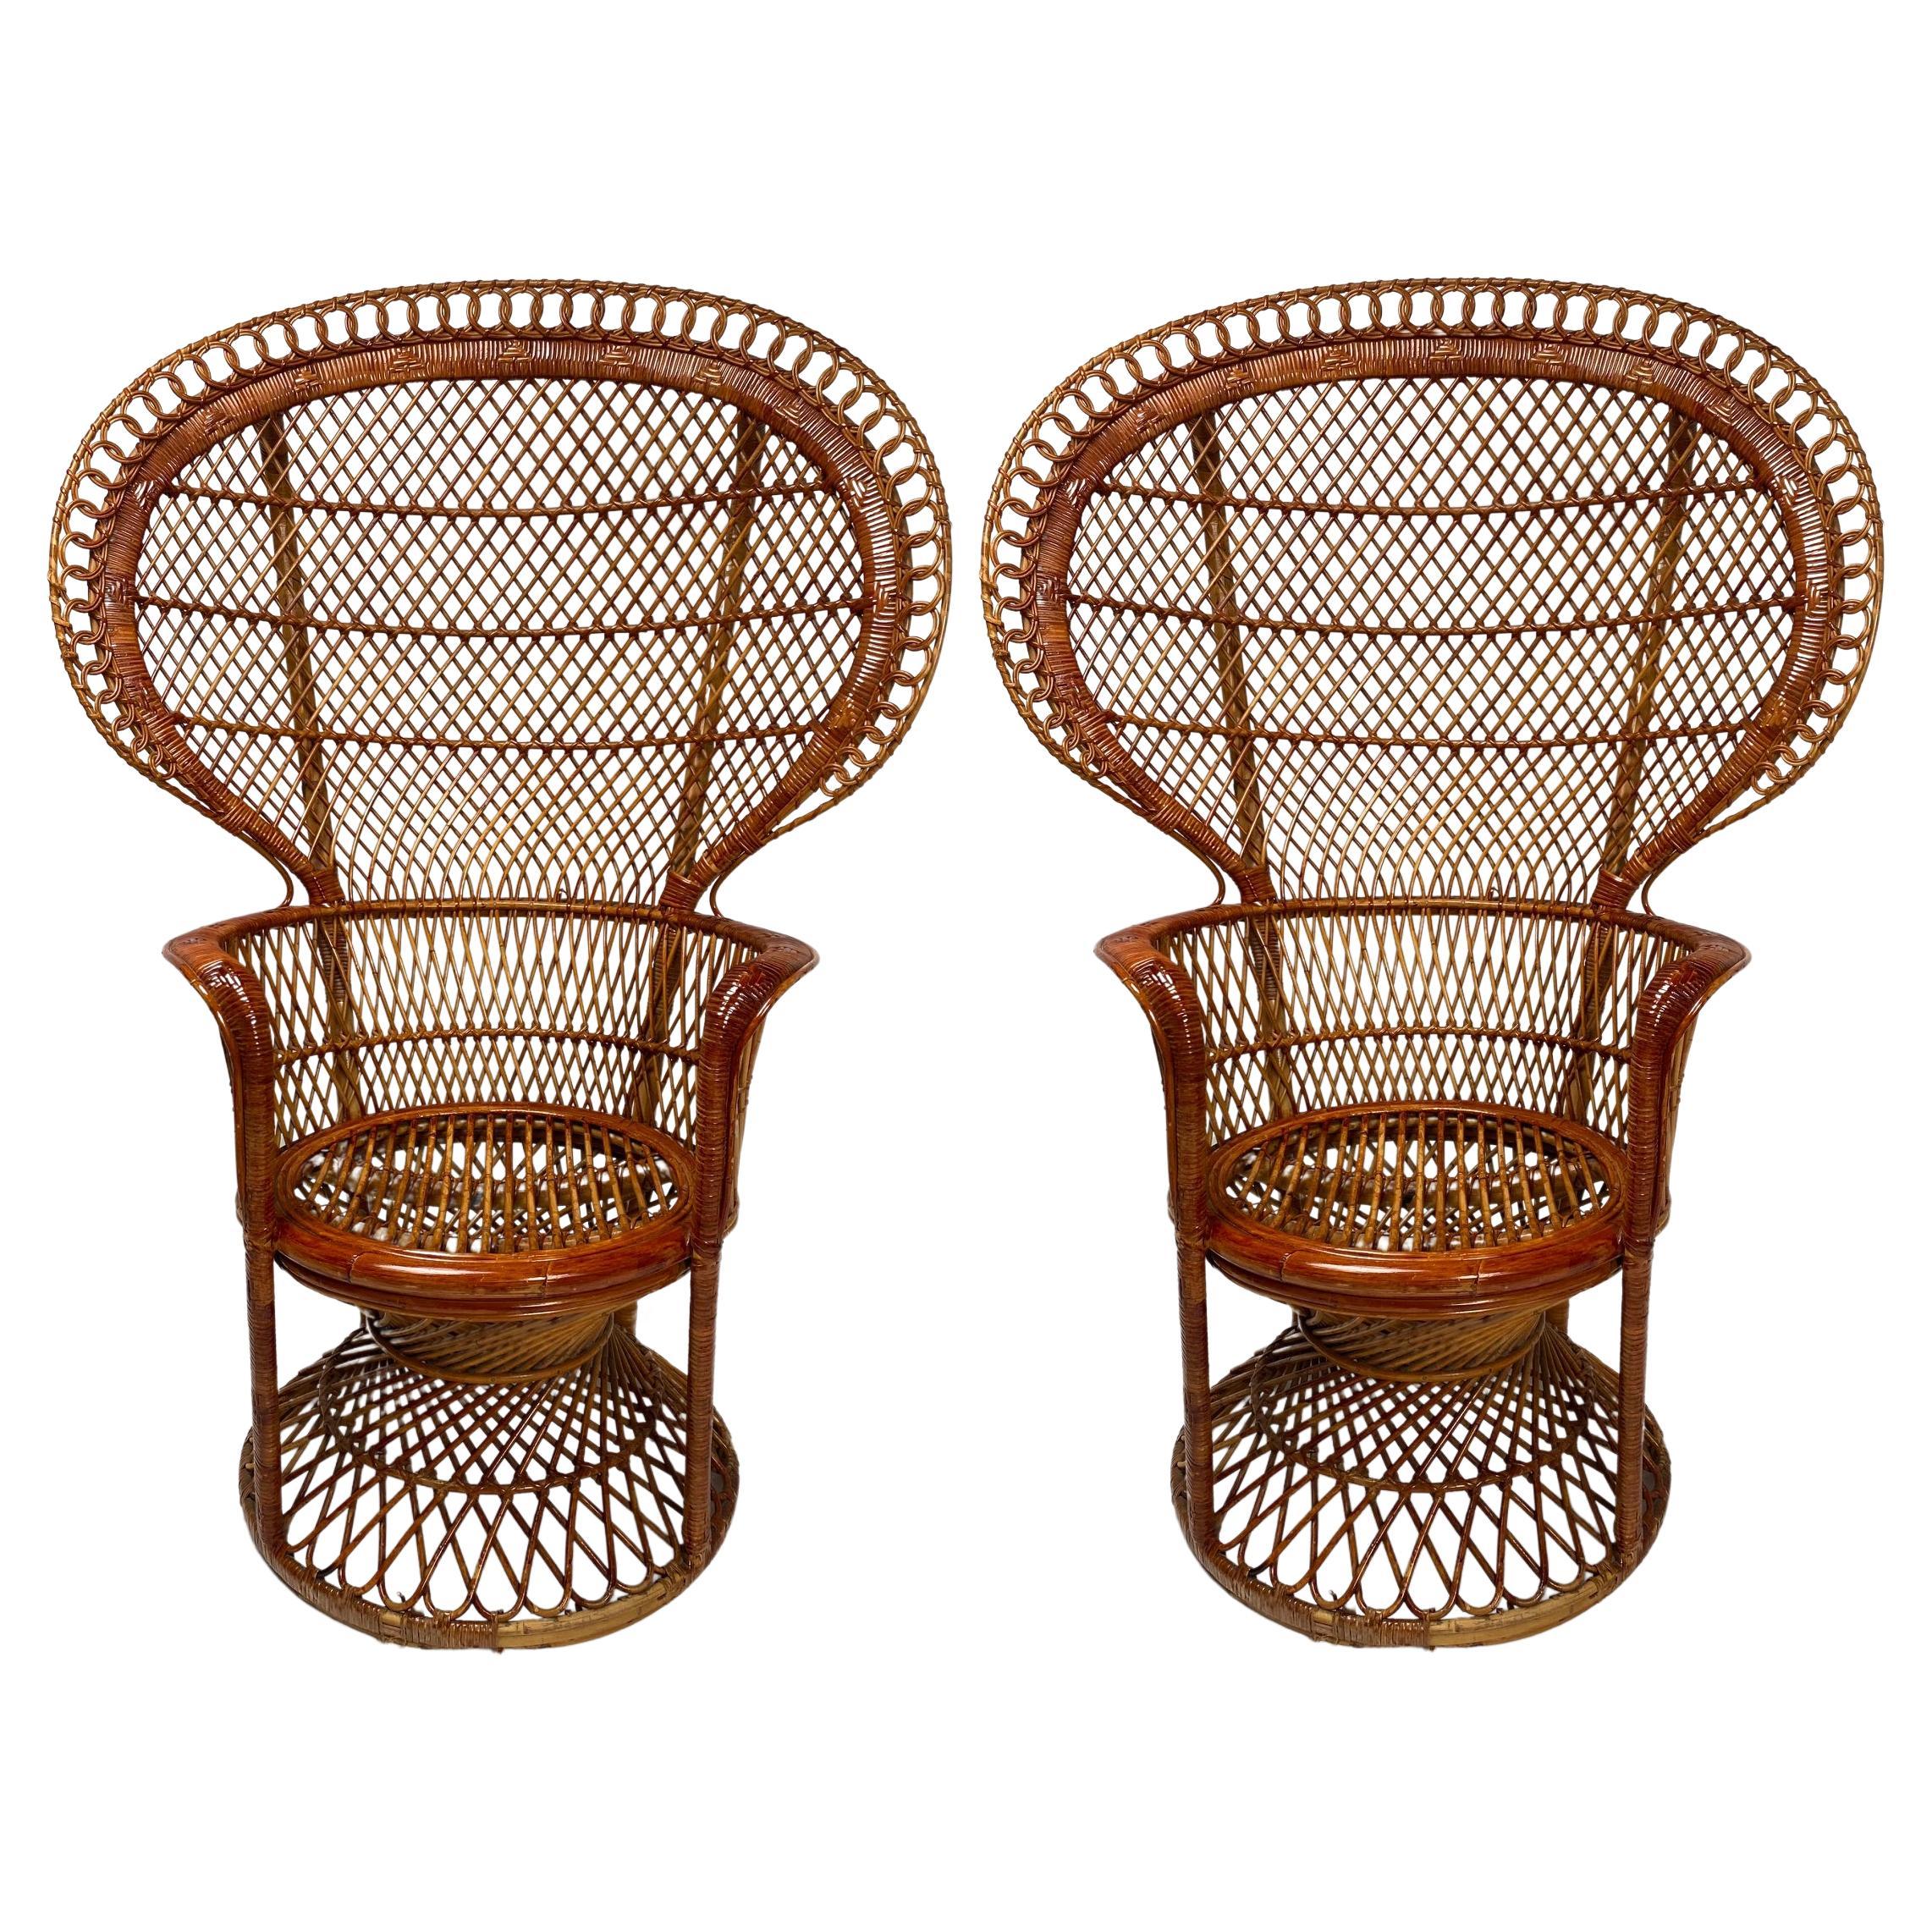 Monumental pair of wicker Armchairs, "Pavone" model, Italy, 1970s